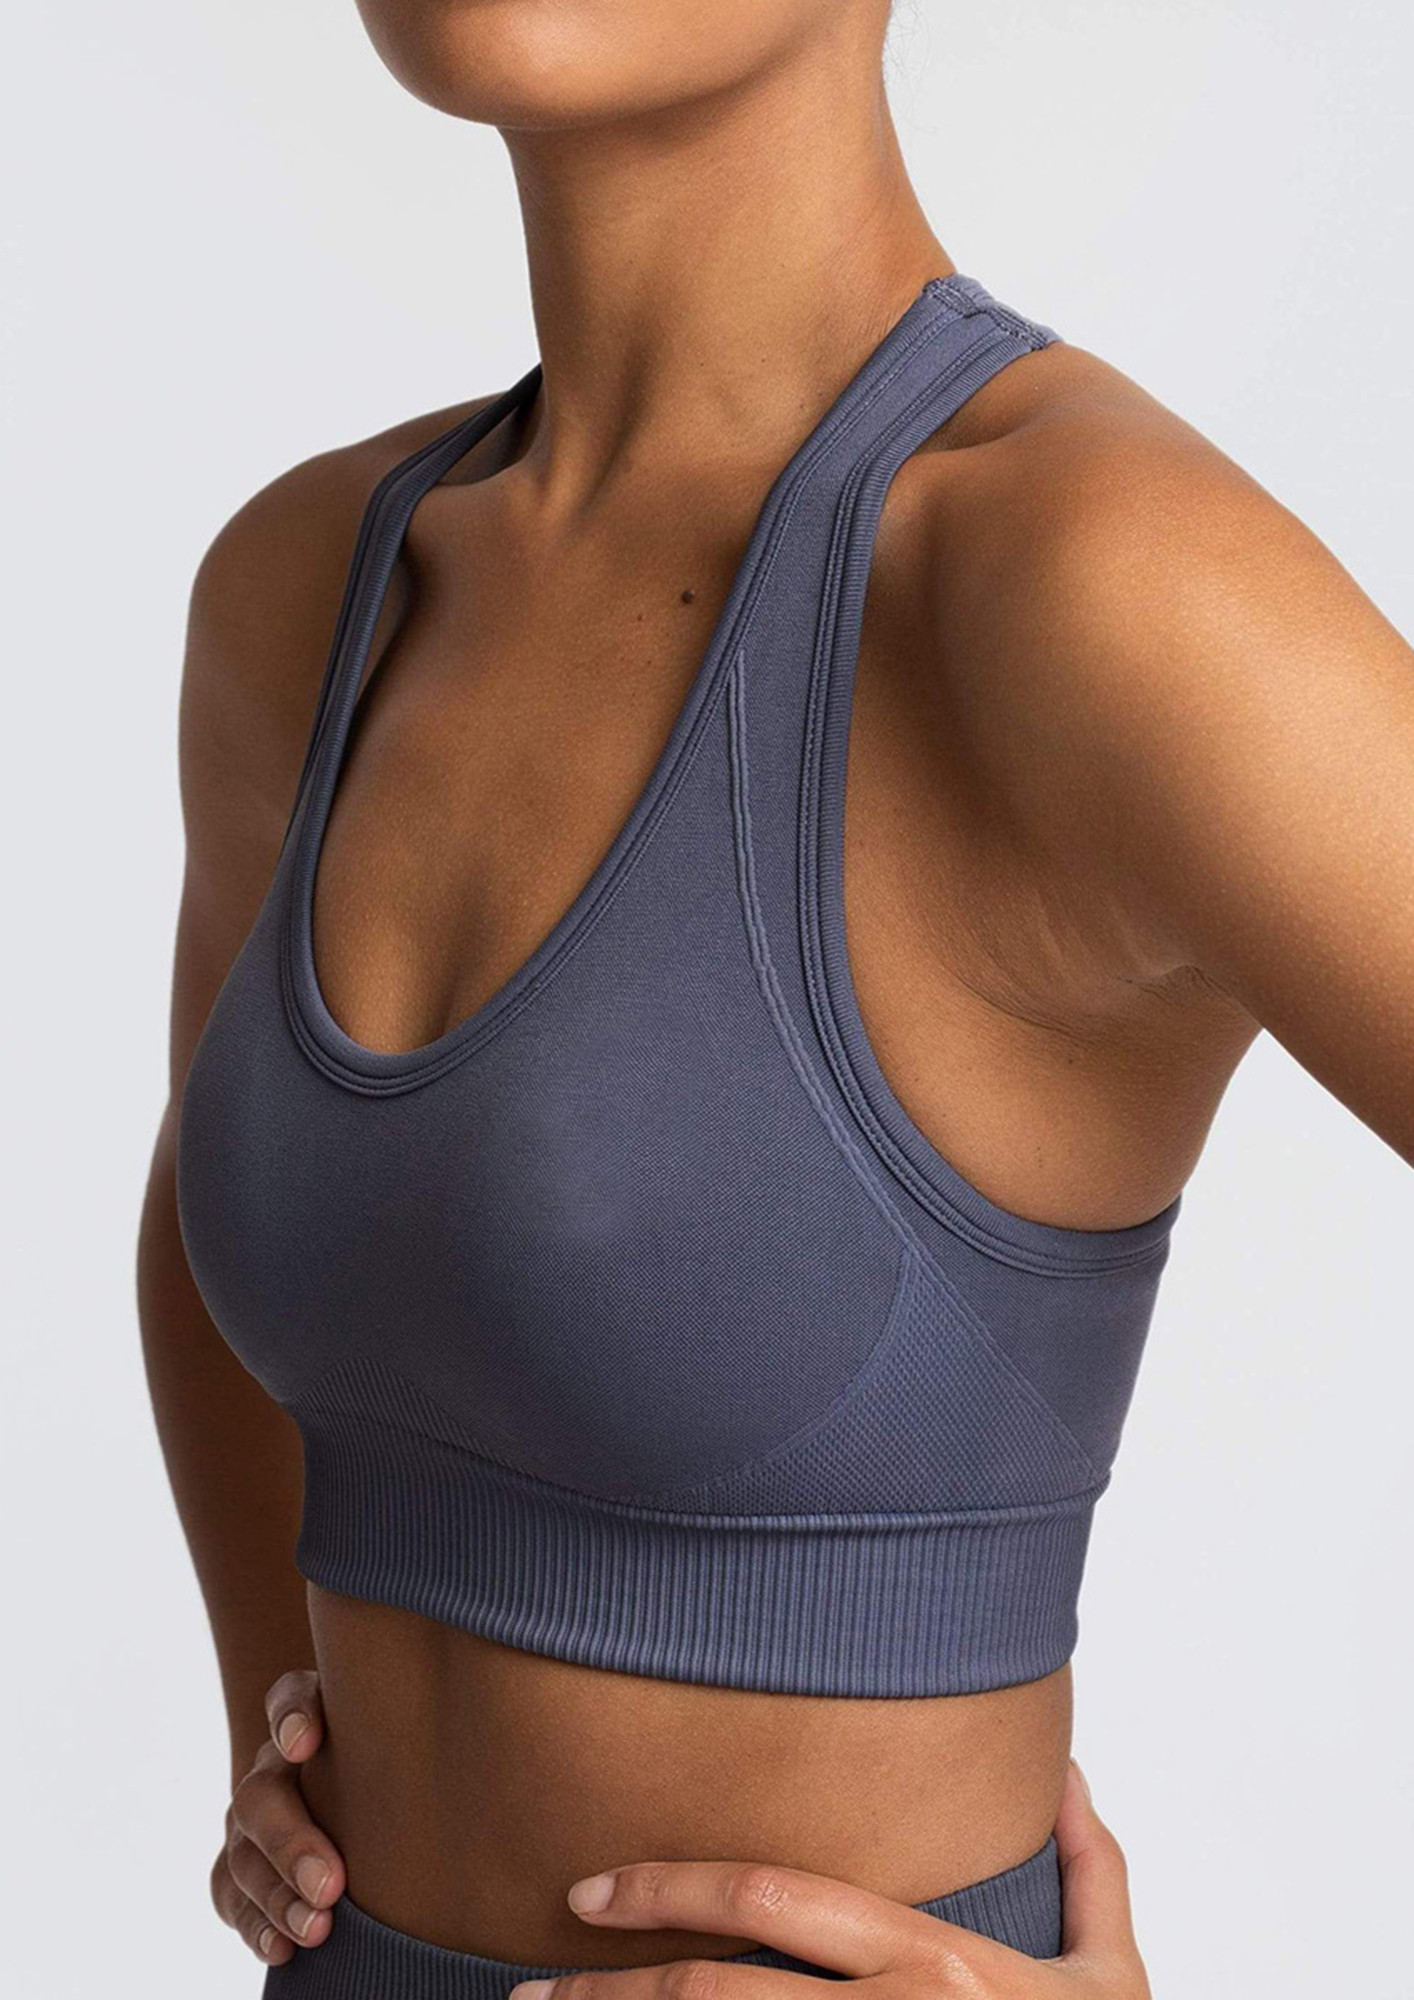 Buy A BASIC FIT GREEN SPORTS BRA for Women Online in India